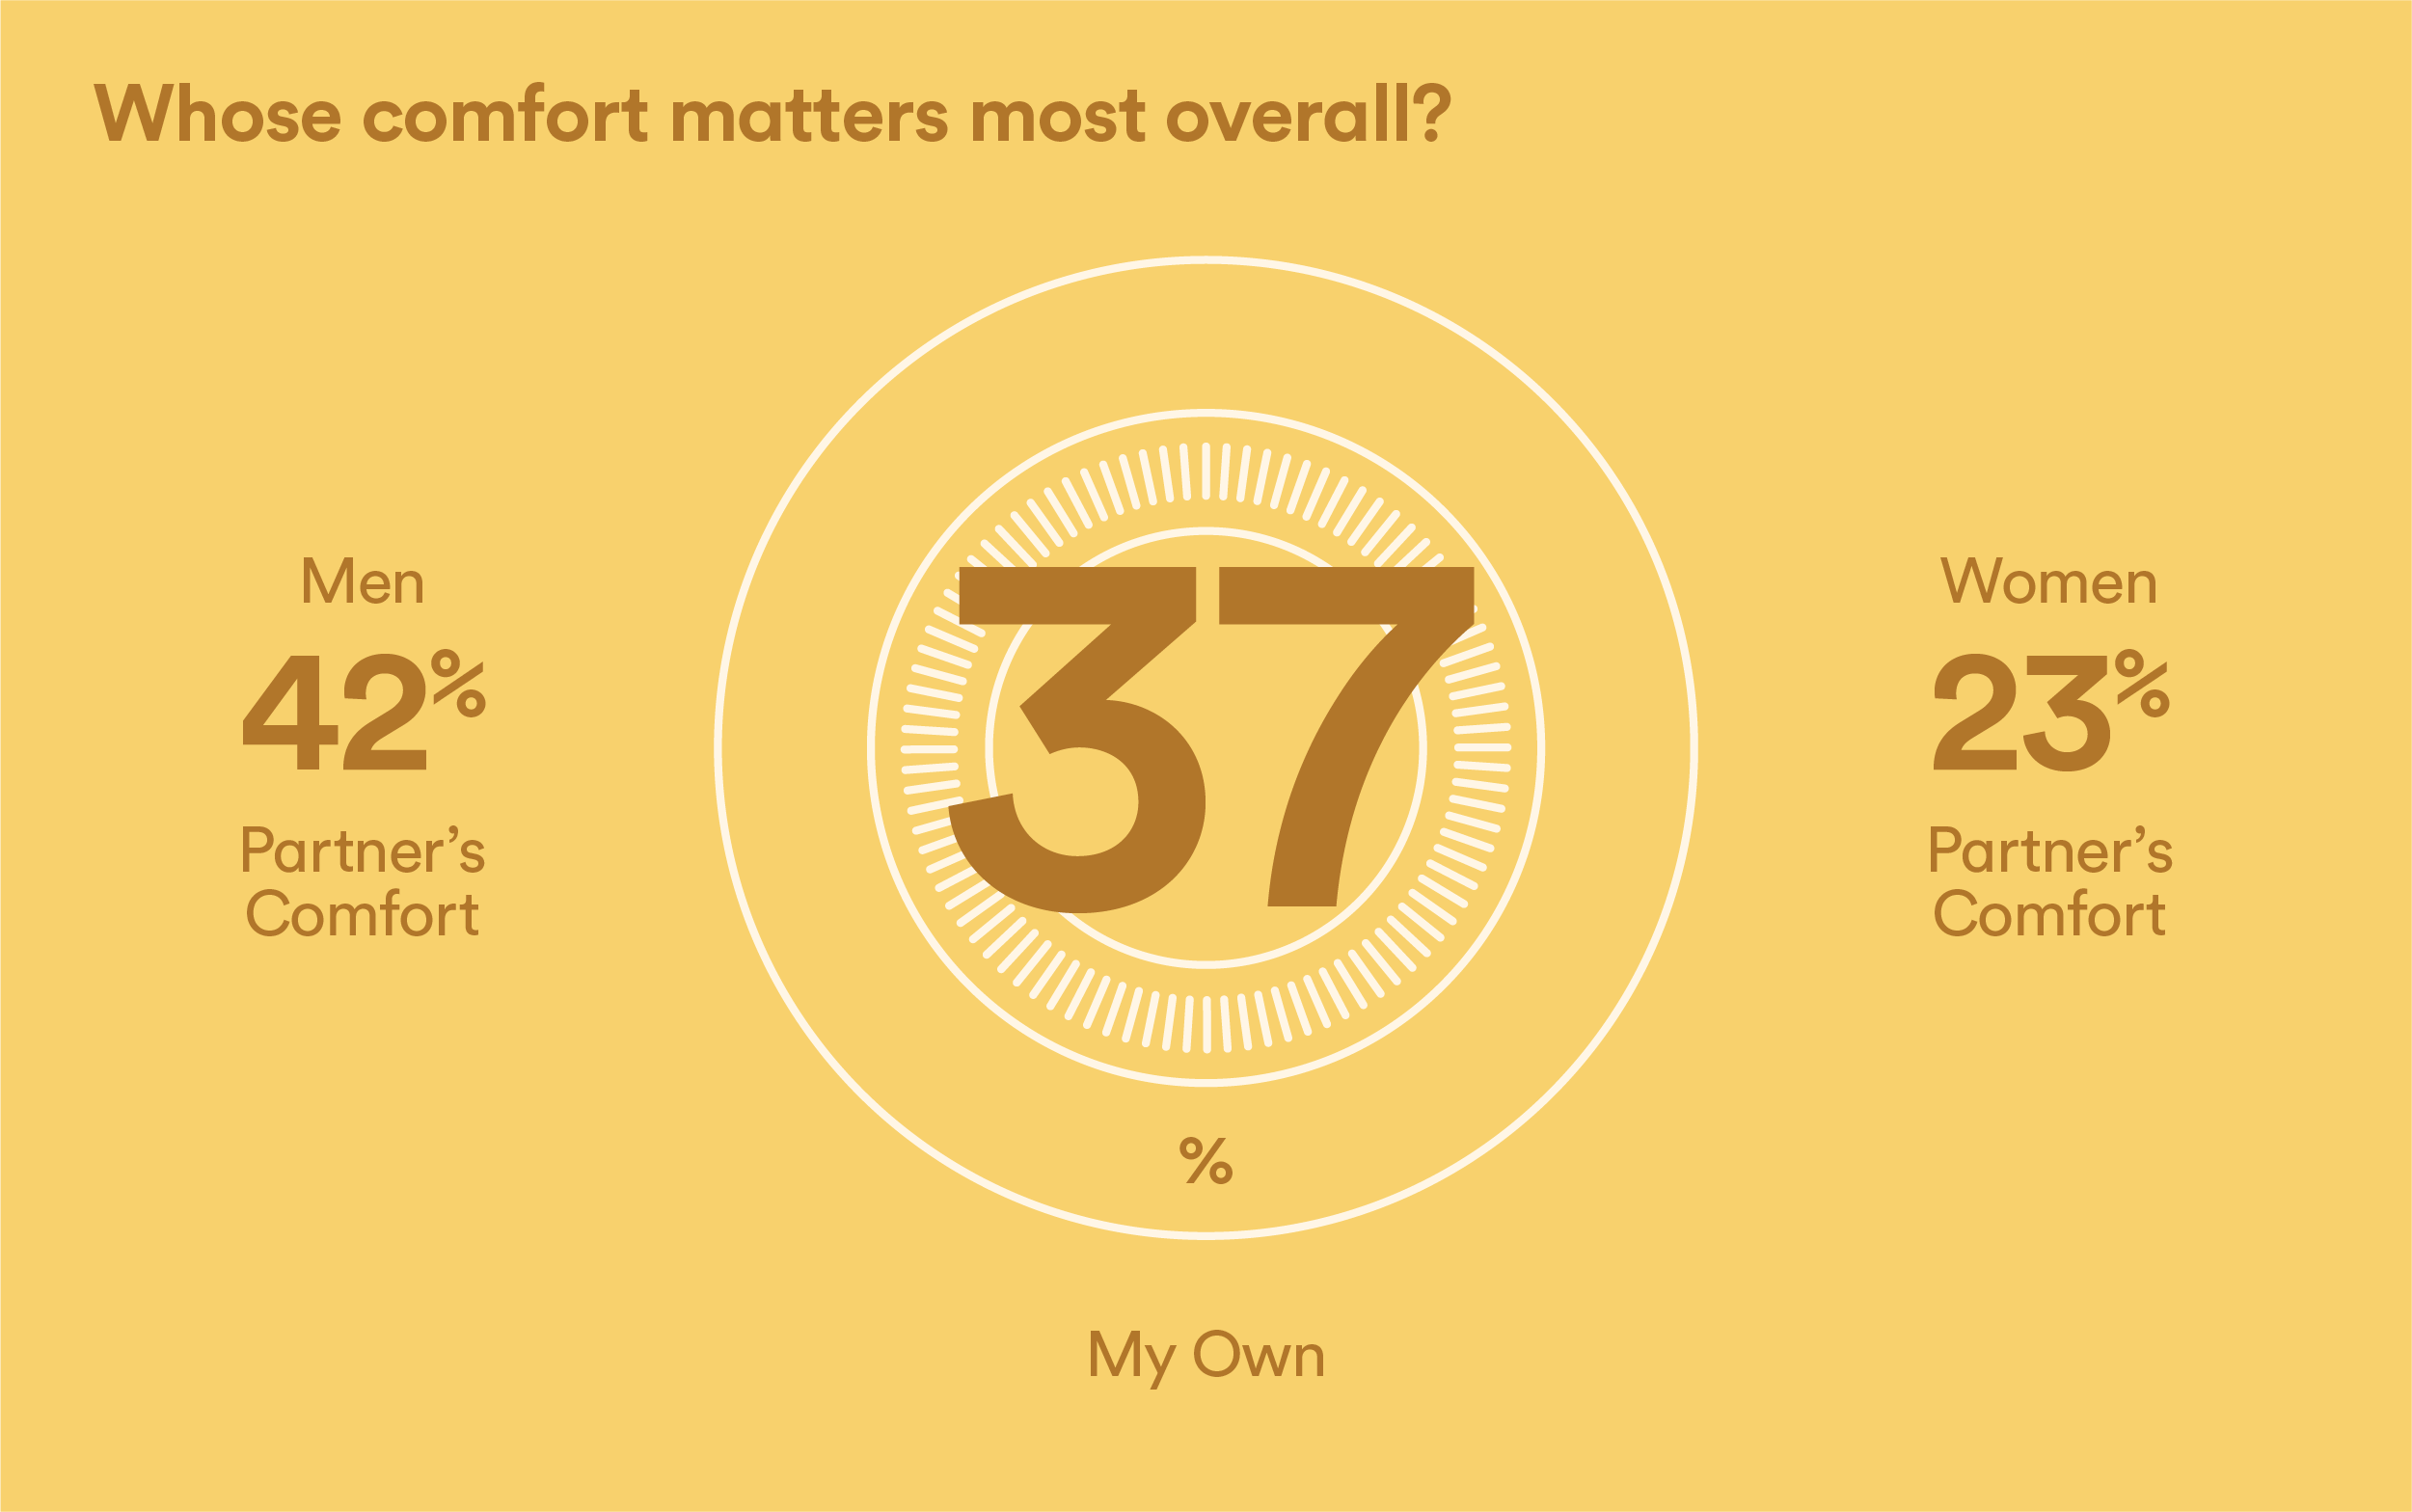 Whose comfort matters most overall